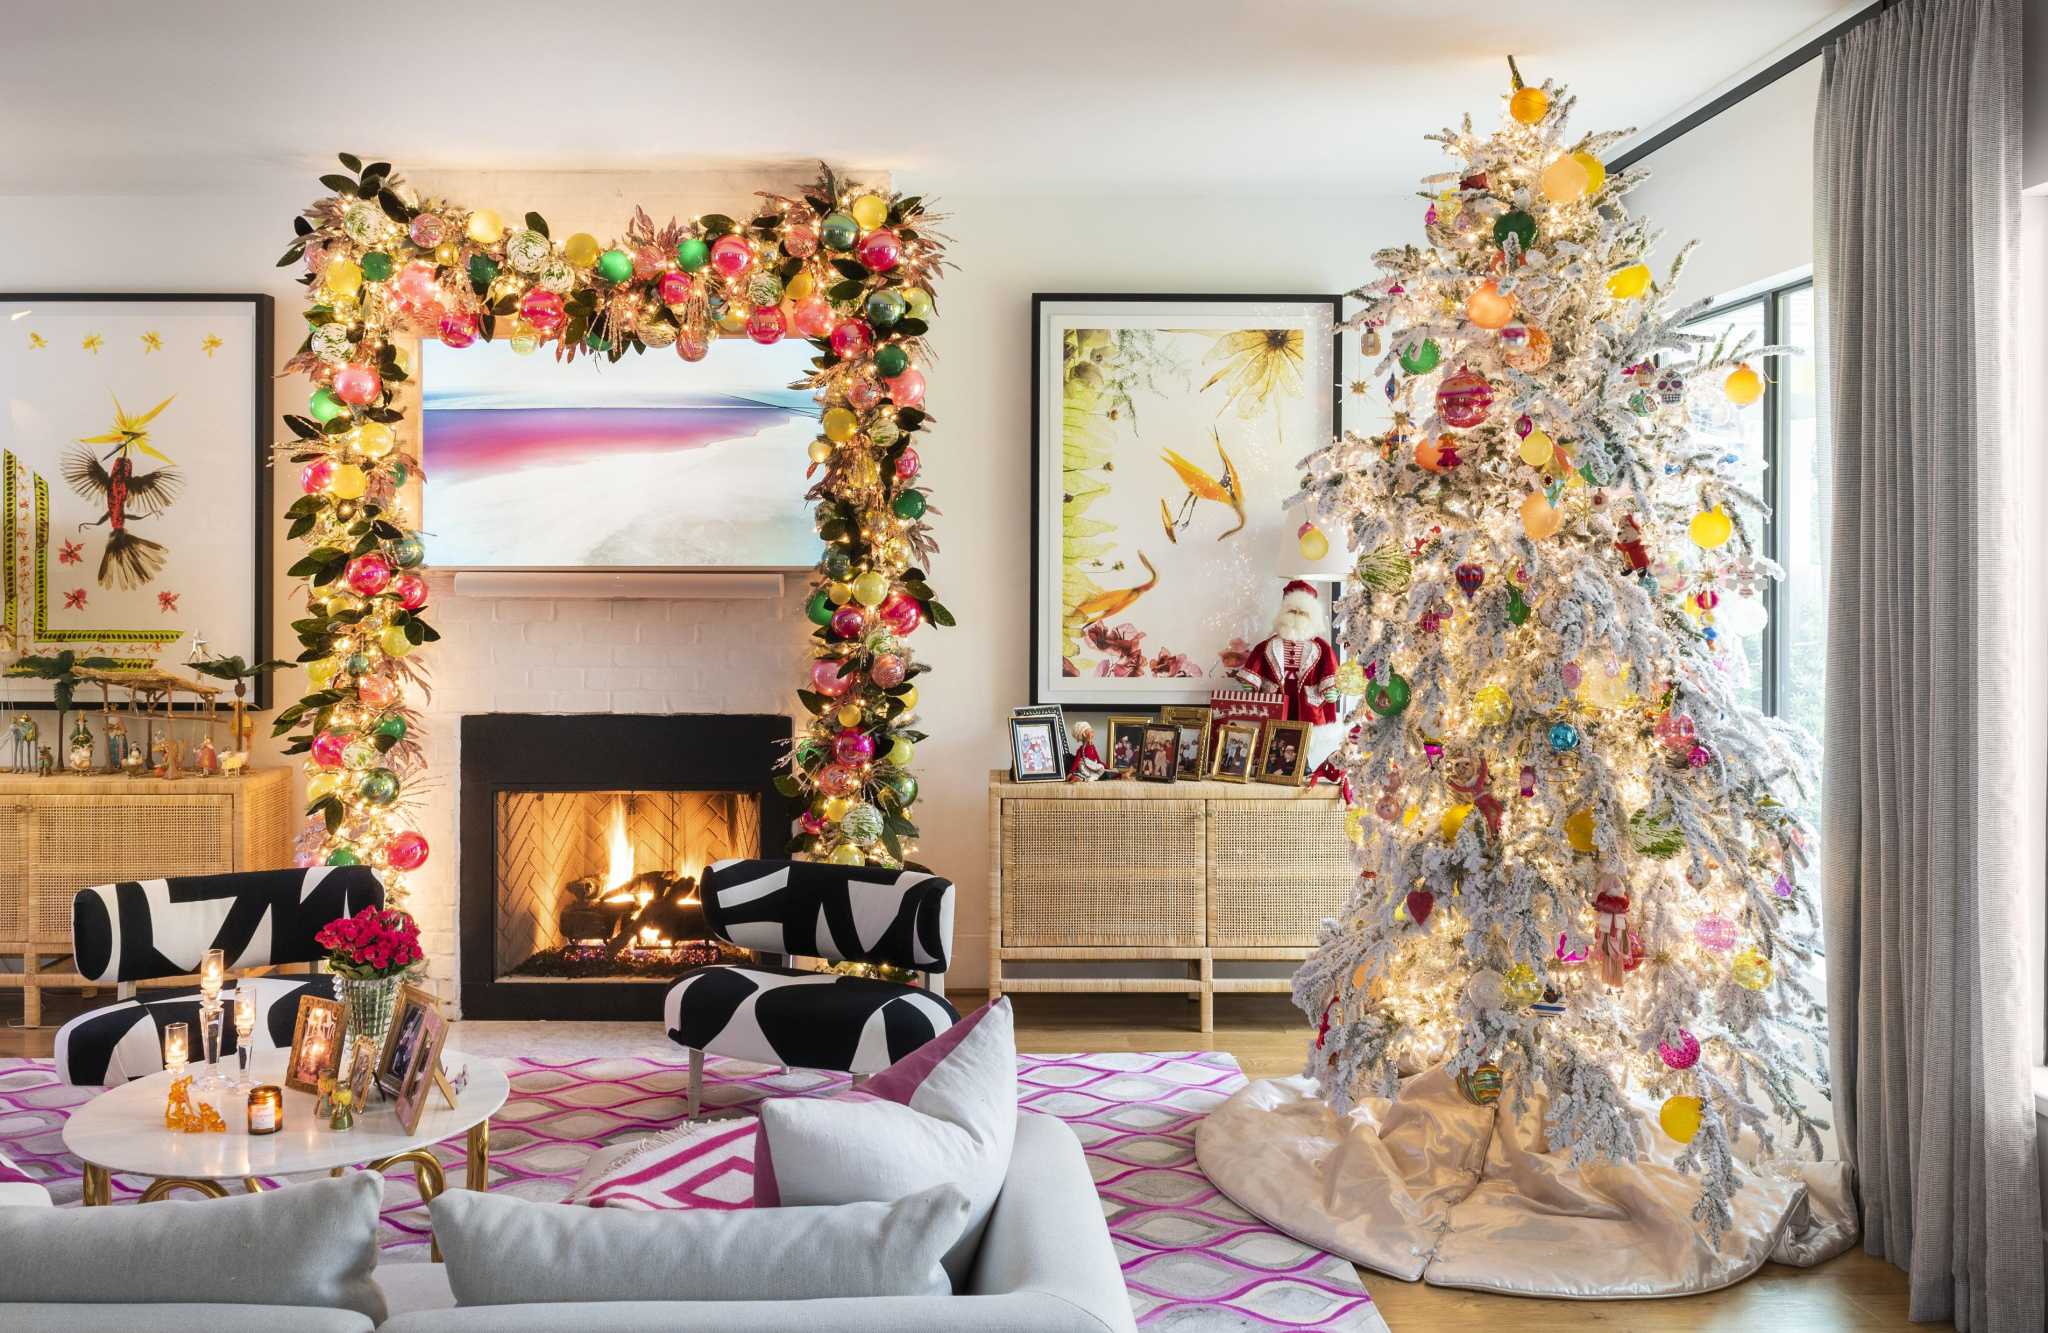 Look inside the home of Regina Gust, the ‘Queen of Christmas’